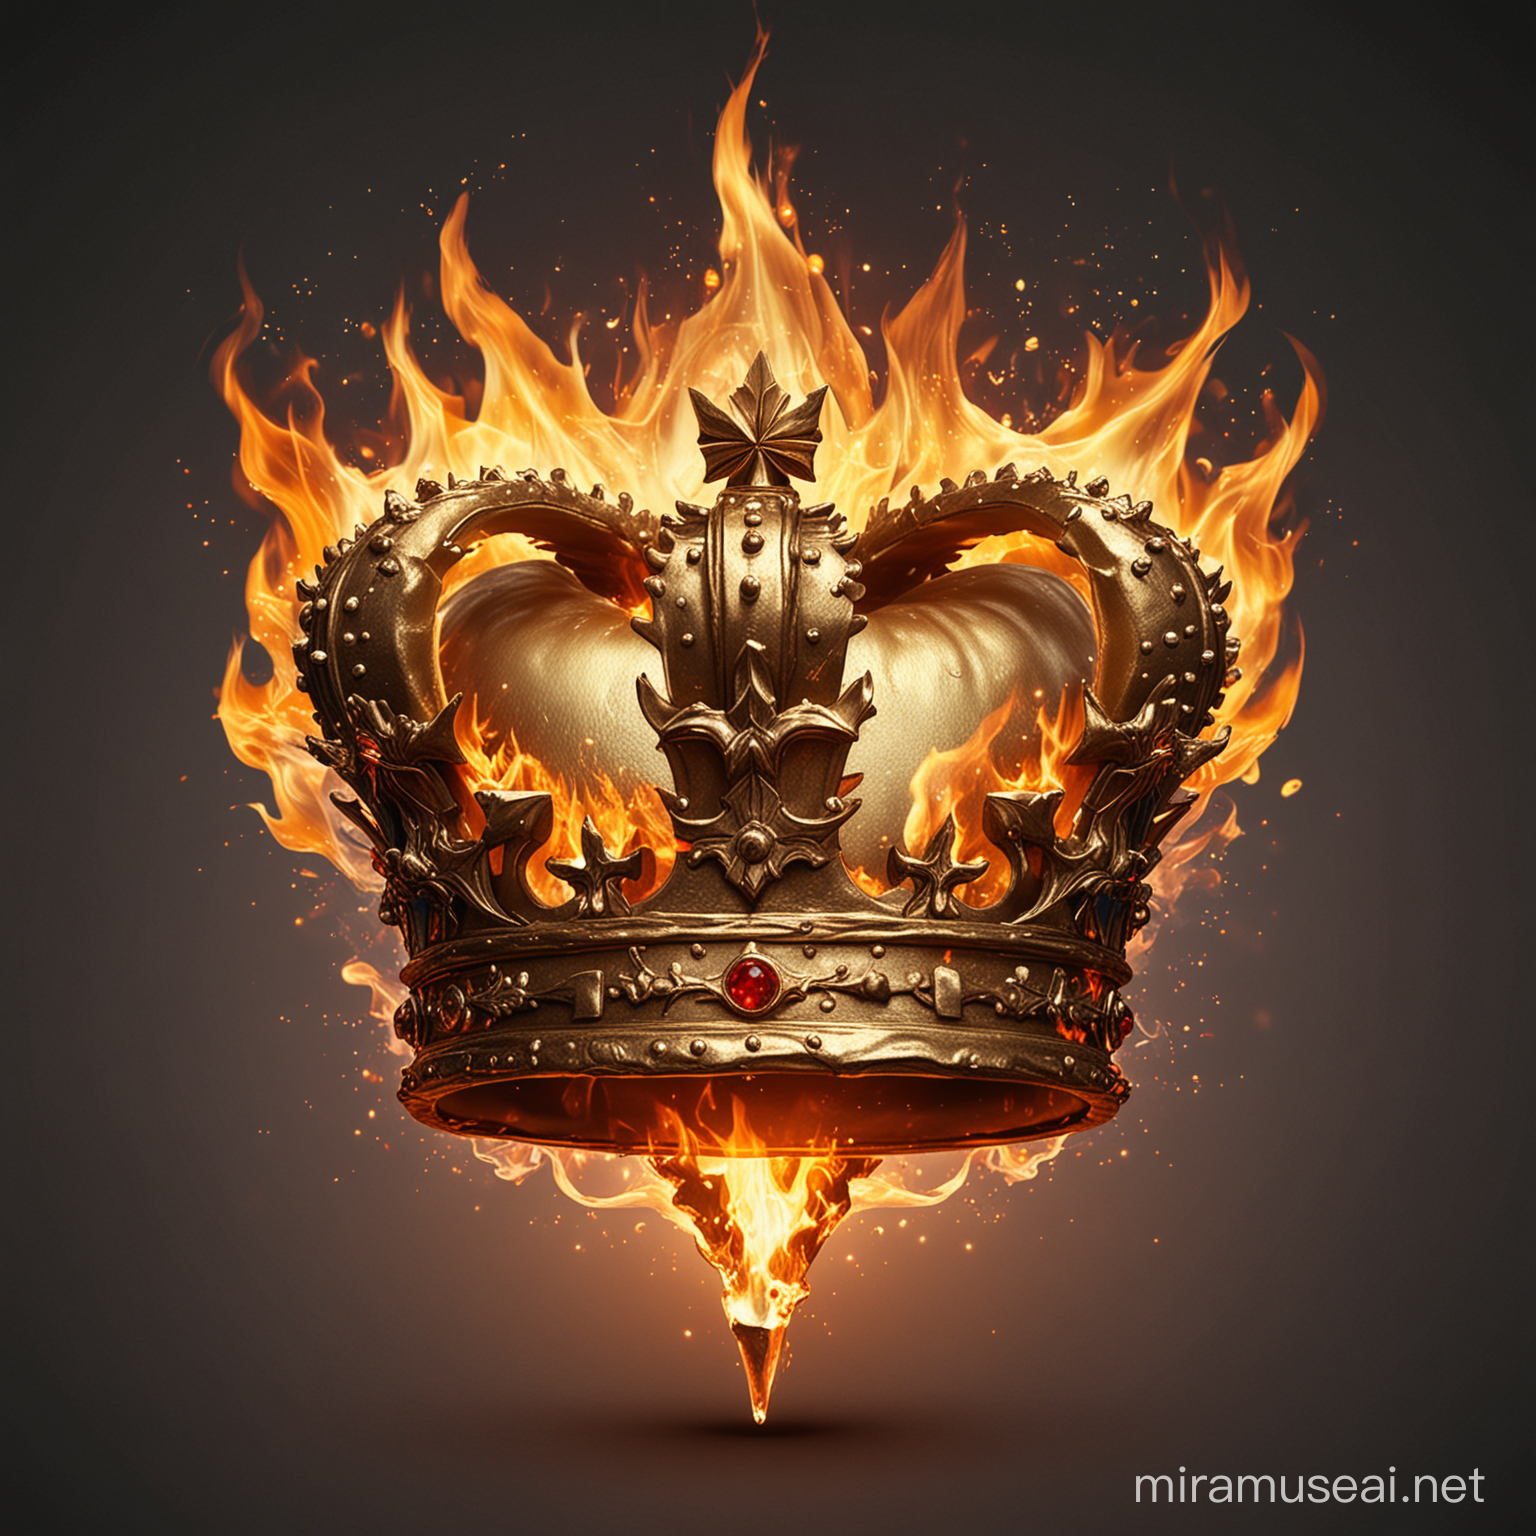 Golden crown on fire.